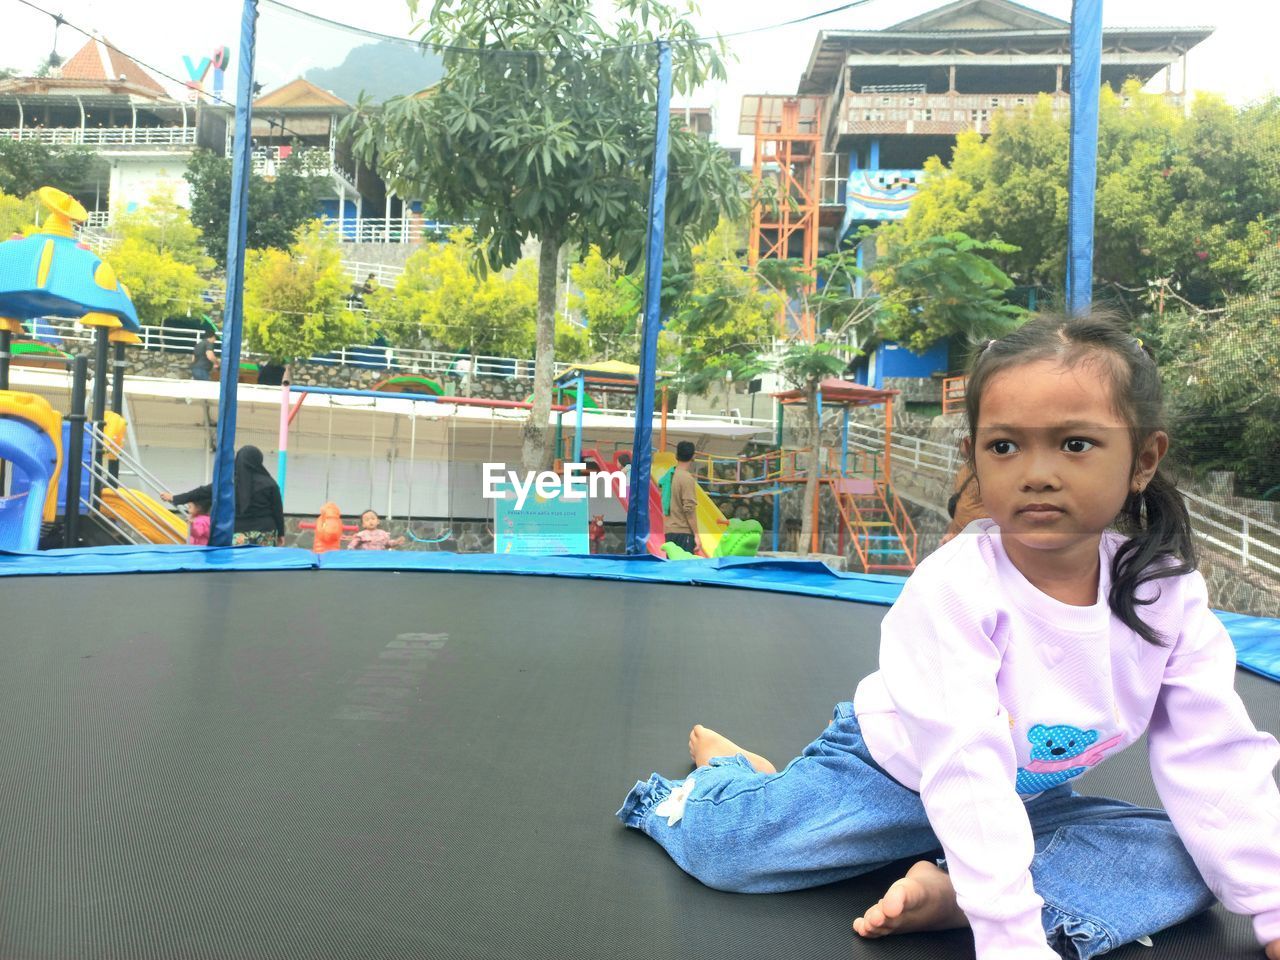 childhood, child, female, one person, women, playground, cute, innocence, happiness, lifestyles, looking at camera, portrait, emotion, day, sitting, smiling, toddler, leisure activity, fun, nature, baby, tree, enjoyment, casual clothing, outdoor play equipment, full length, plant, outdoors, men, front view, architecture, preschool, city